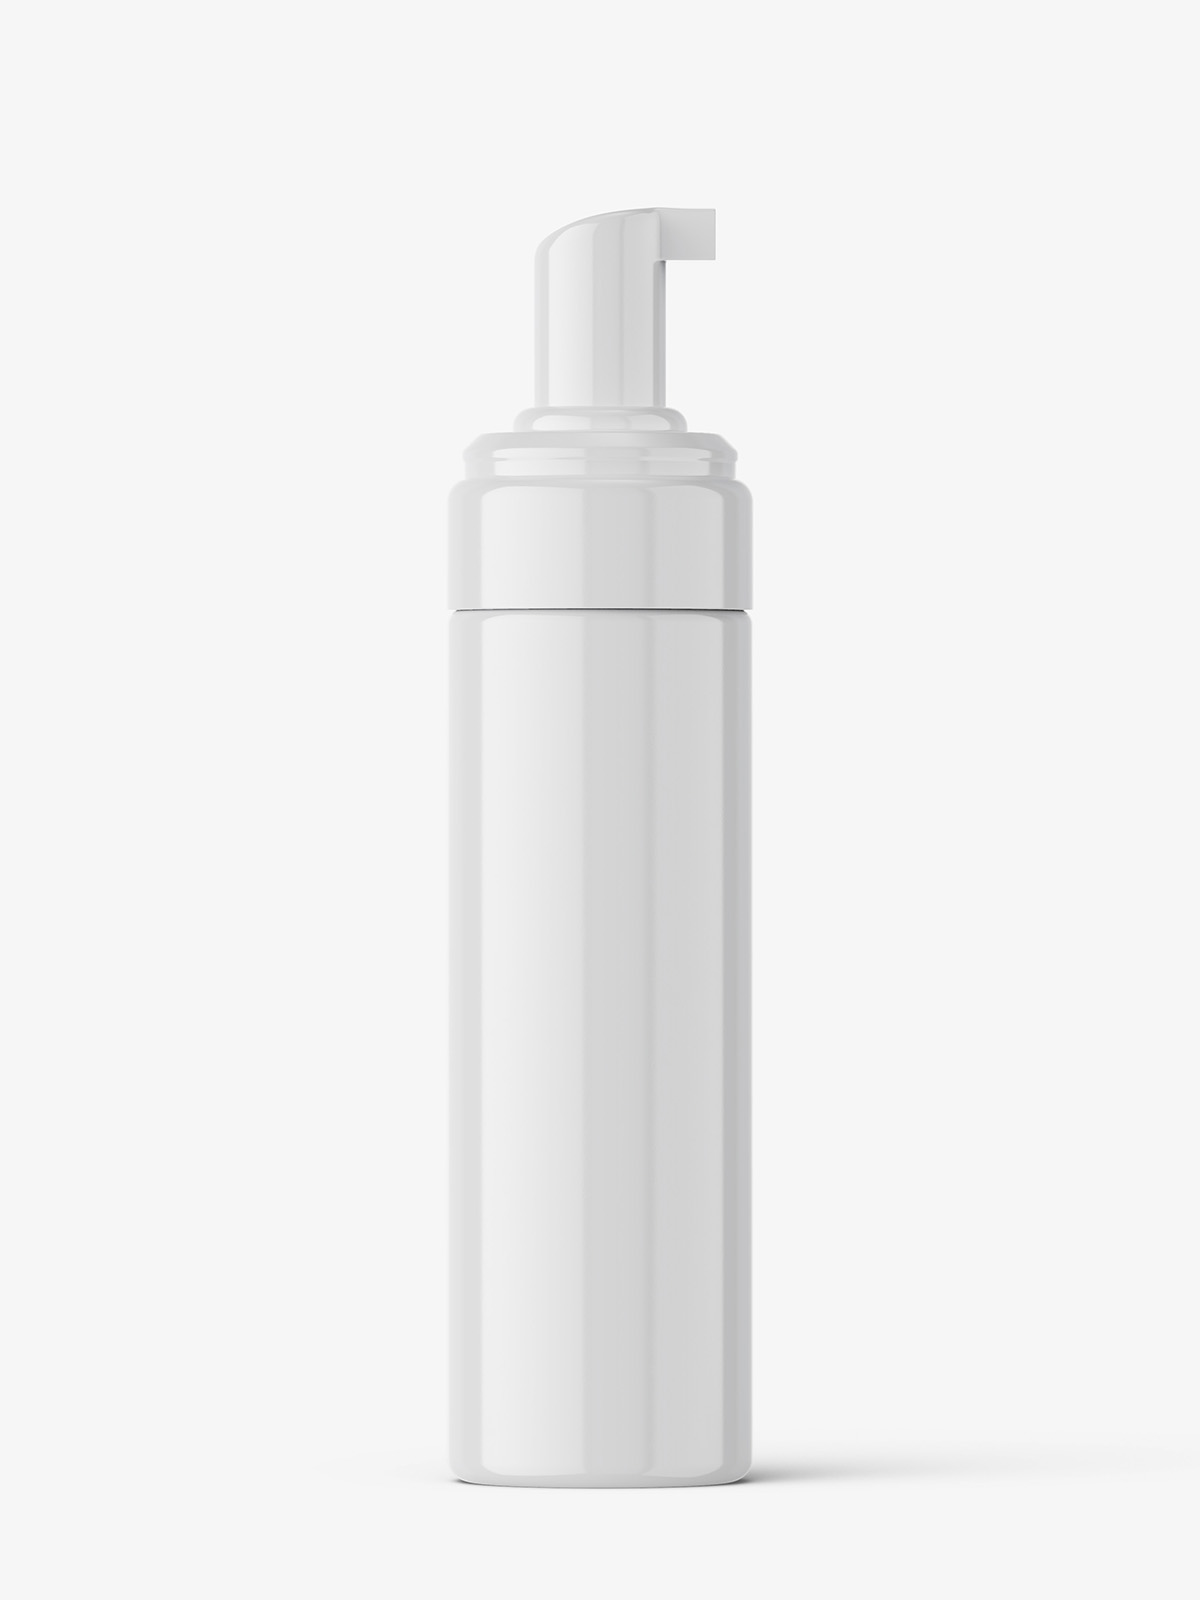 Download Airless pump bottle mockup / glossy - Smarty Mockups